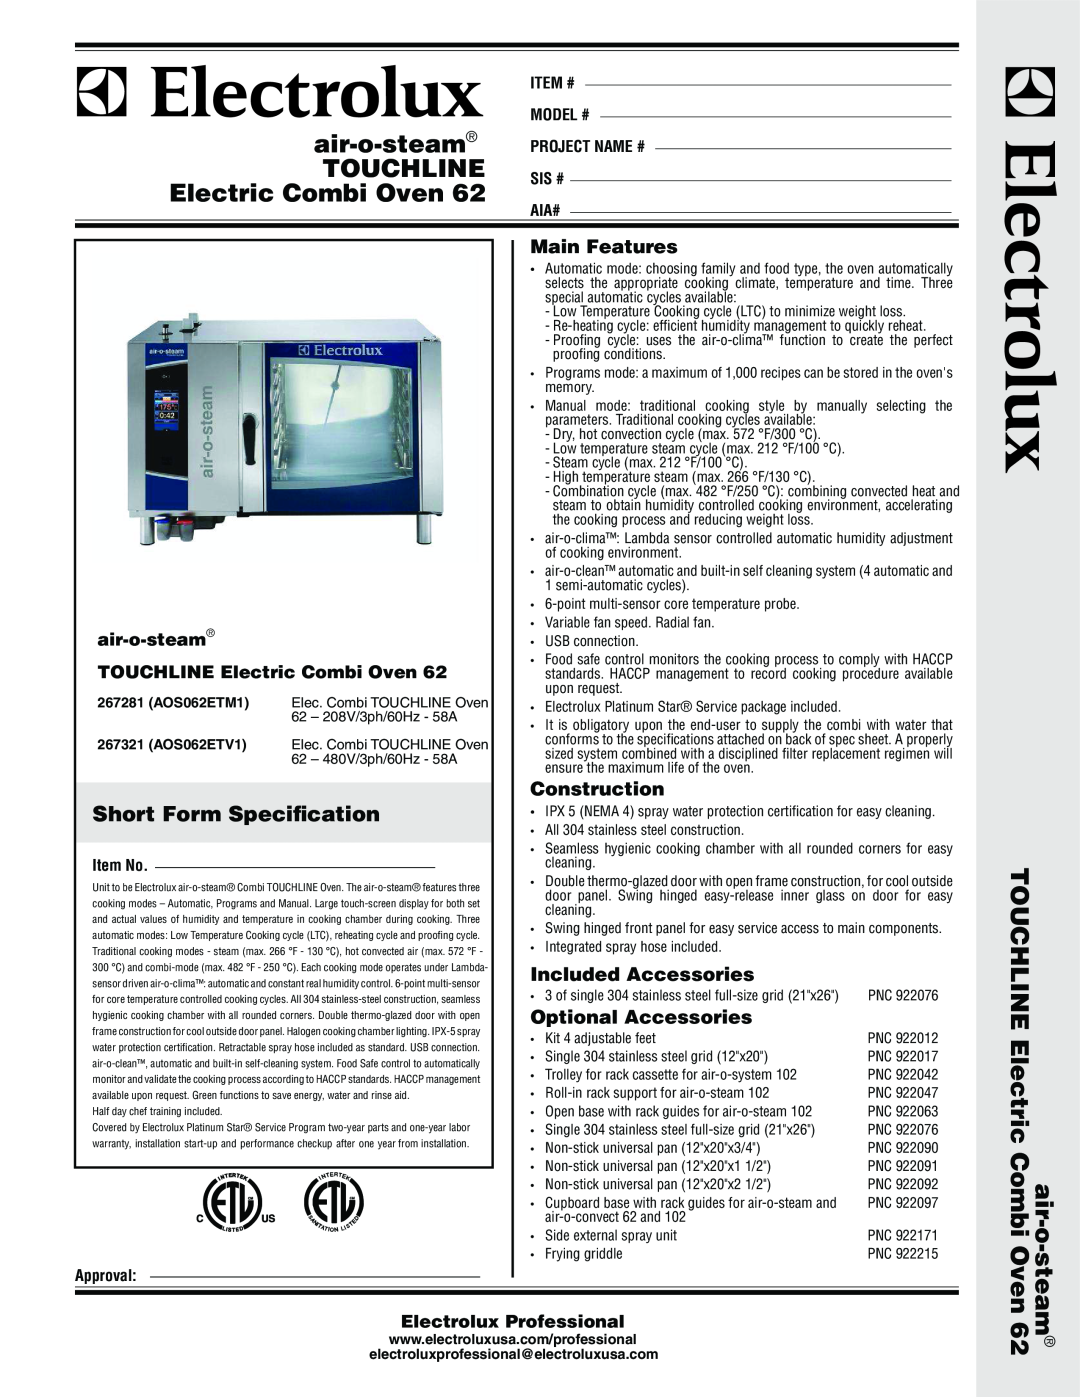 Electrolux AOS062ETM1, AOS062ETV1 warranty Short Form Speciﬁcation, air-o-steam, TOUCHLINE Electric Combi Oven, Touchline 